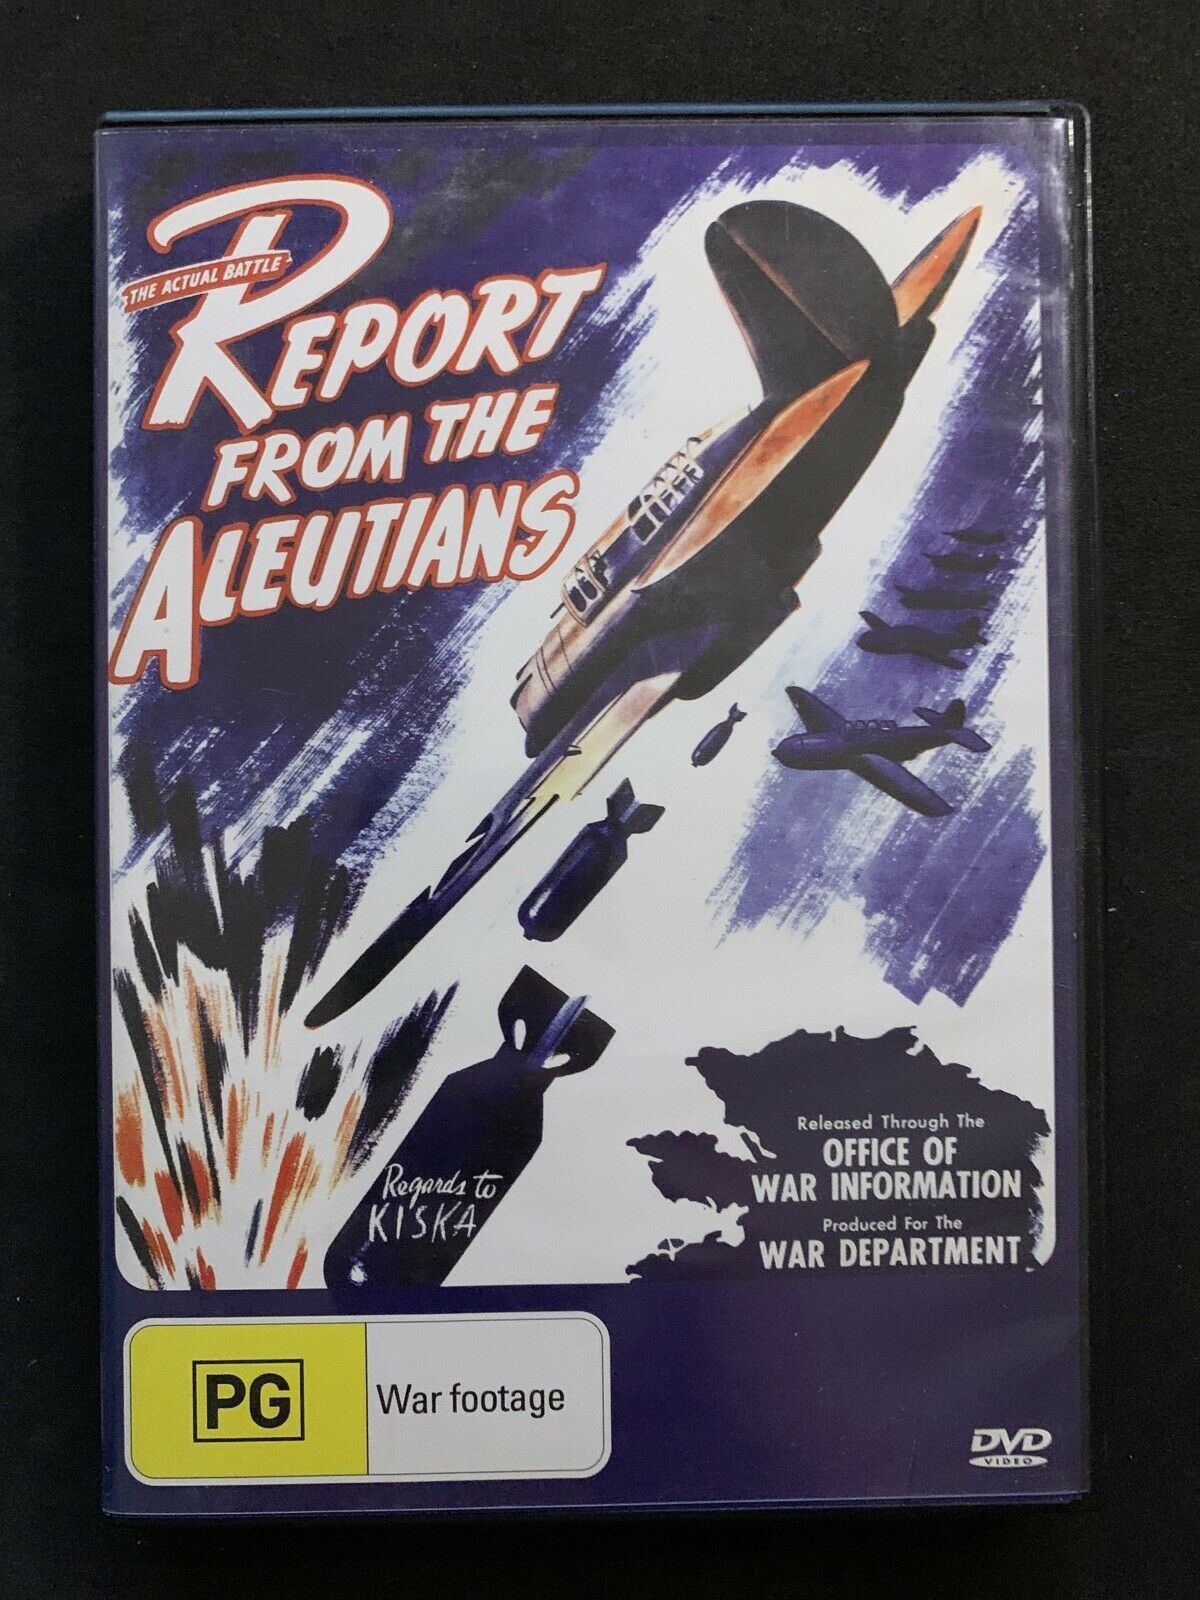 Report From The Aleutians: Actual Battle (DVD, 1943) REAL BATTLES - All Regions